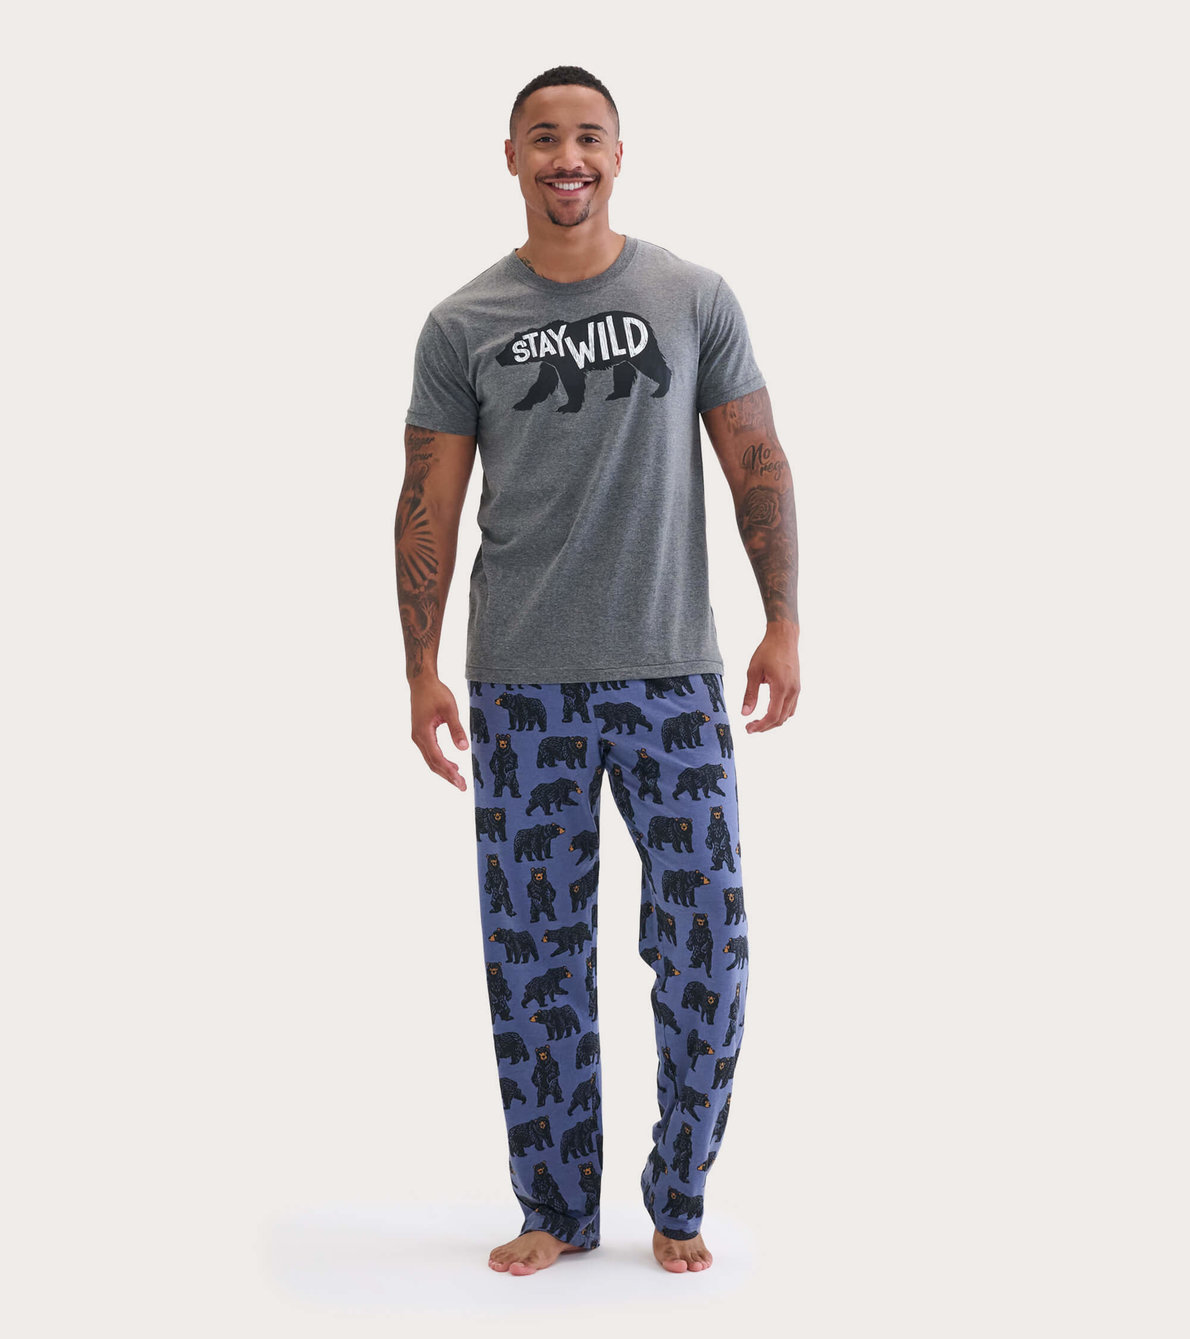 View larger image of Stay Wild Men's Tee and Pants Pajama Separates